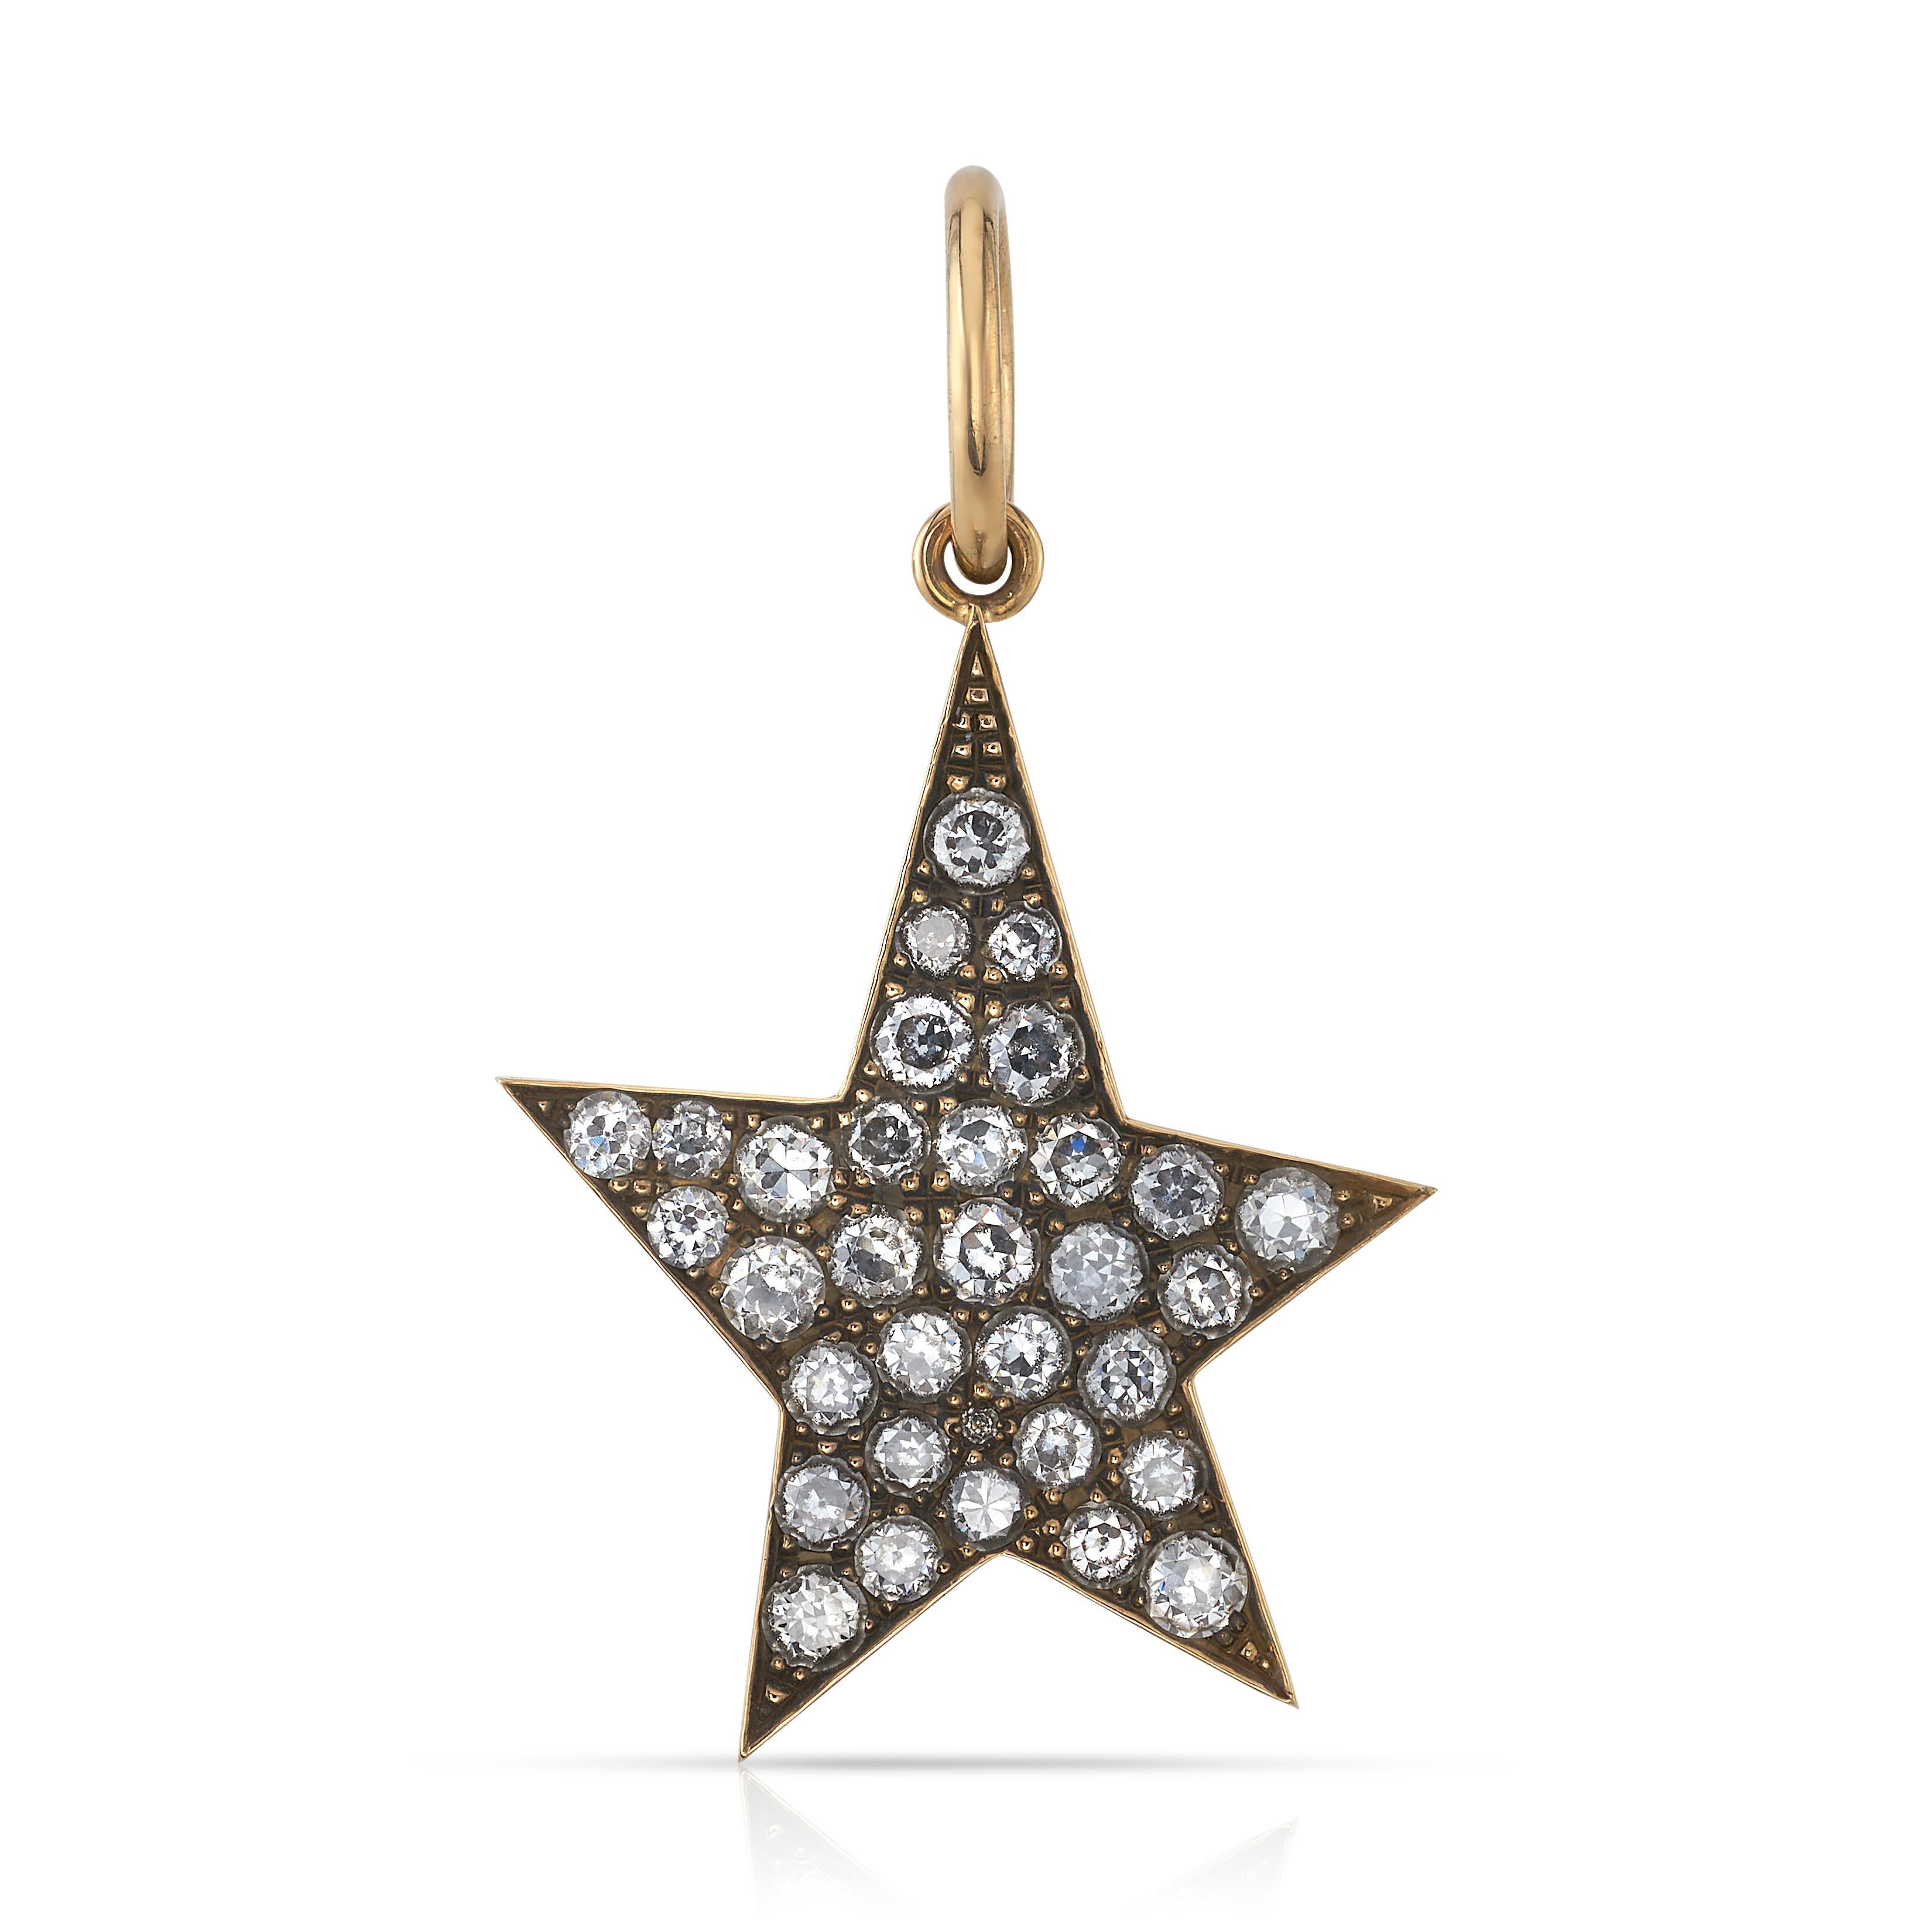 Approximately 4.00ctw G-H/VS-SI old European cut diamonds pave set in a handcrafted asymmetrical 18K yellow gold star charm. Available in an oxidized or polished finish. Charm measures 30mm x 40mm. 

Price does not include chain.

*Stone weight may